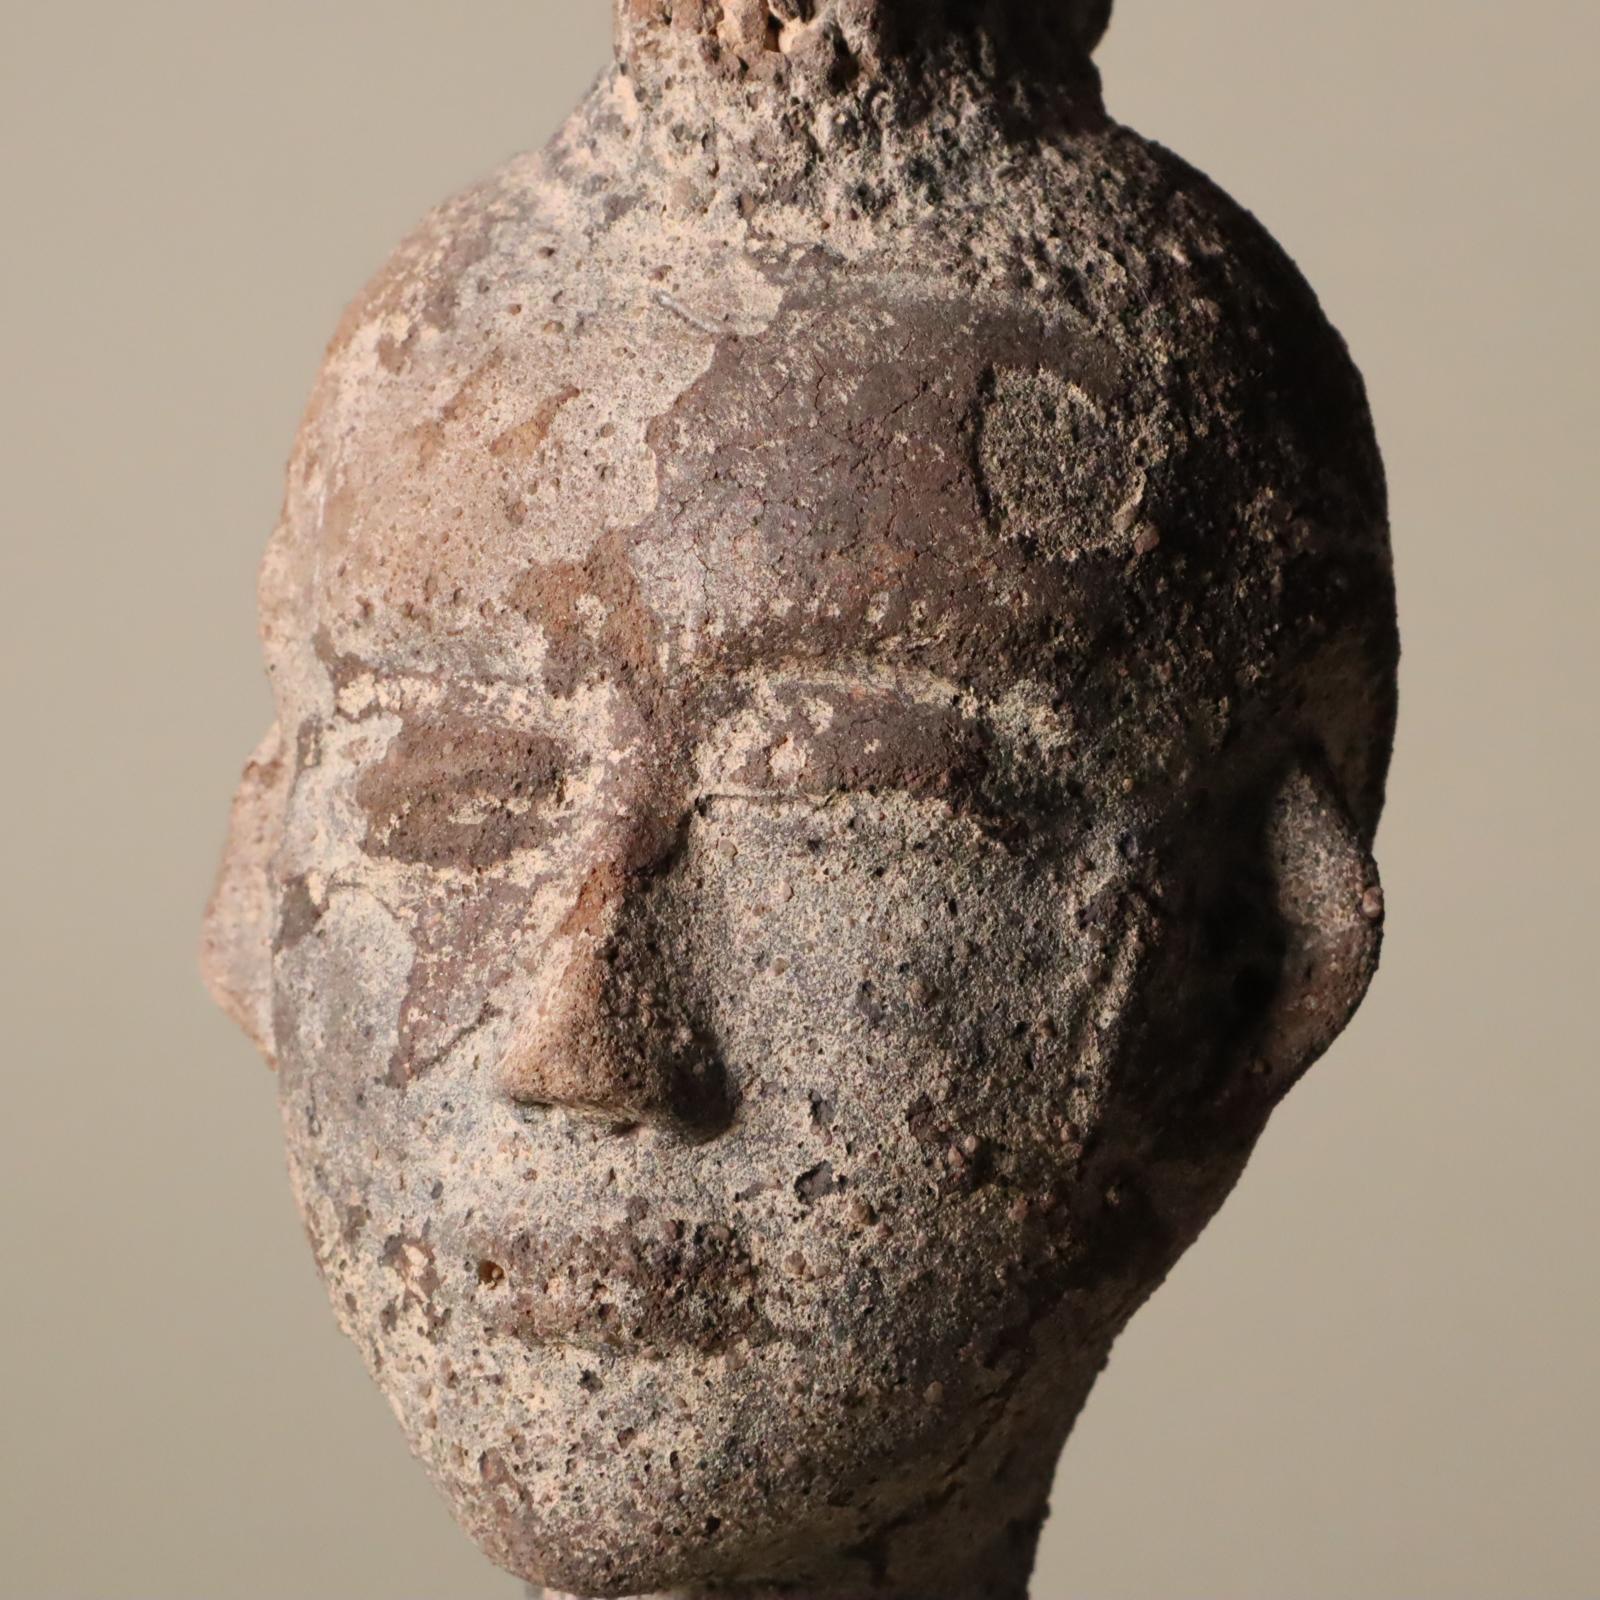 Store closing March 31. Full of character with an extraordinary hairdo, this is an earthenware or terracotta portrait from the Akan people of Ghana, 19th century or earlier.
This has a terrific crested coiffure. The facial features set in a